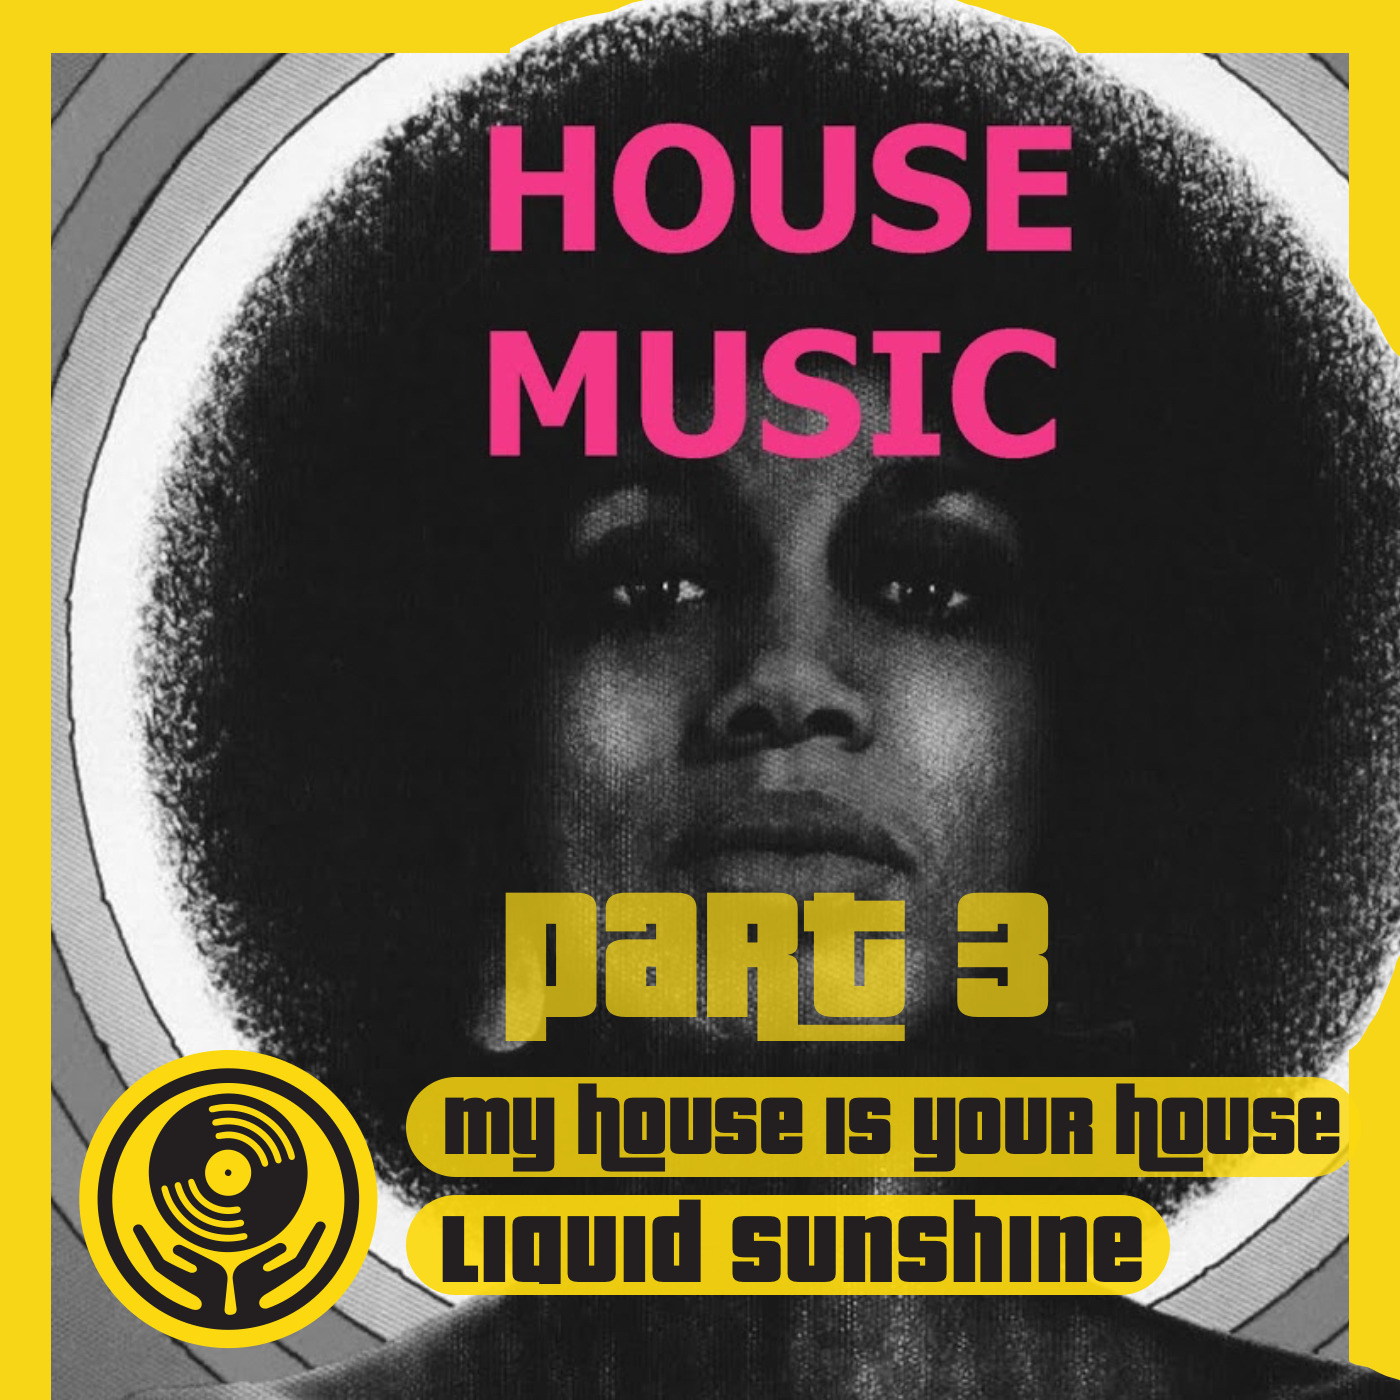 My House is Your House - Sunset to Sunrise House Trip - Part 3 of 4 - Liquid Sunshine @ The Face Radio - 05-07-2022